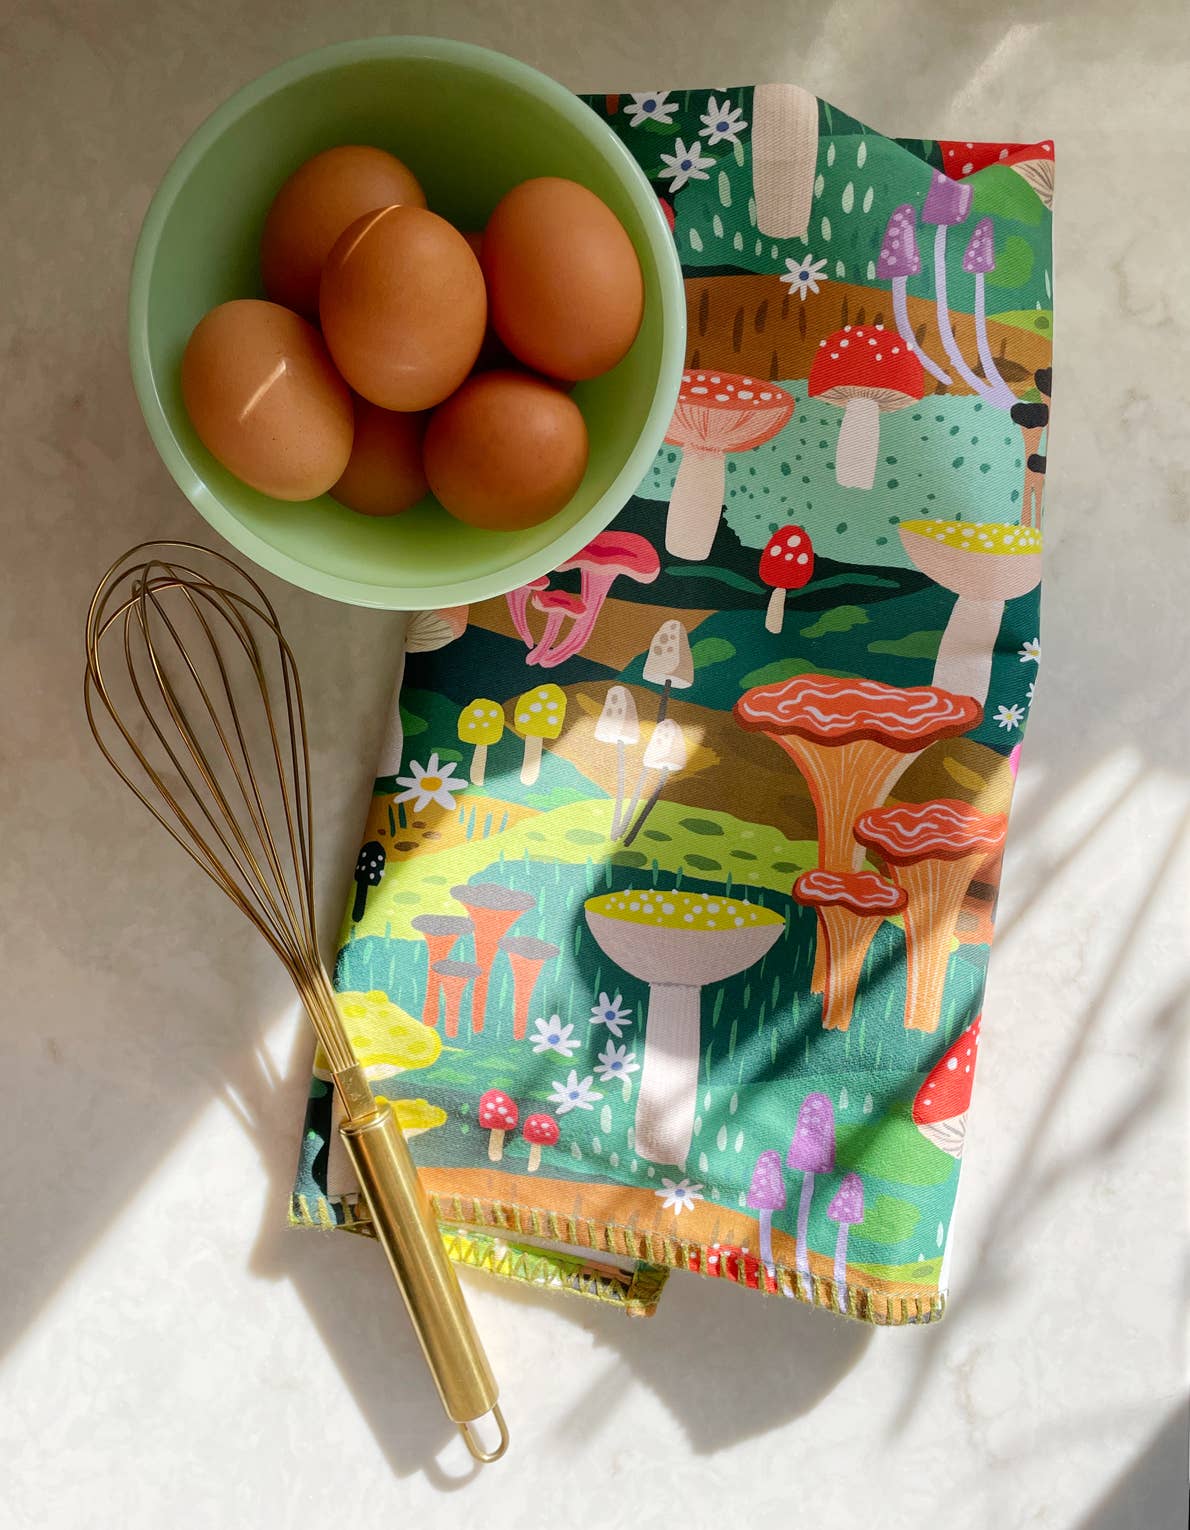 Tea towel with a colorful mushroom design all over it. Shown here with a whisk and bowl of eggs 